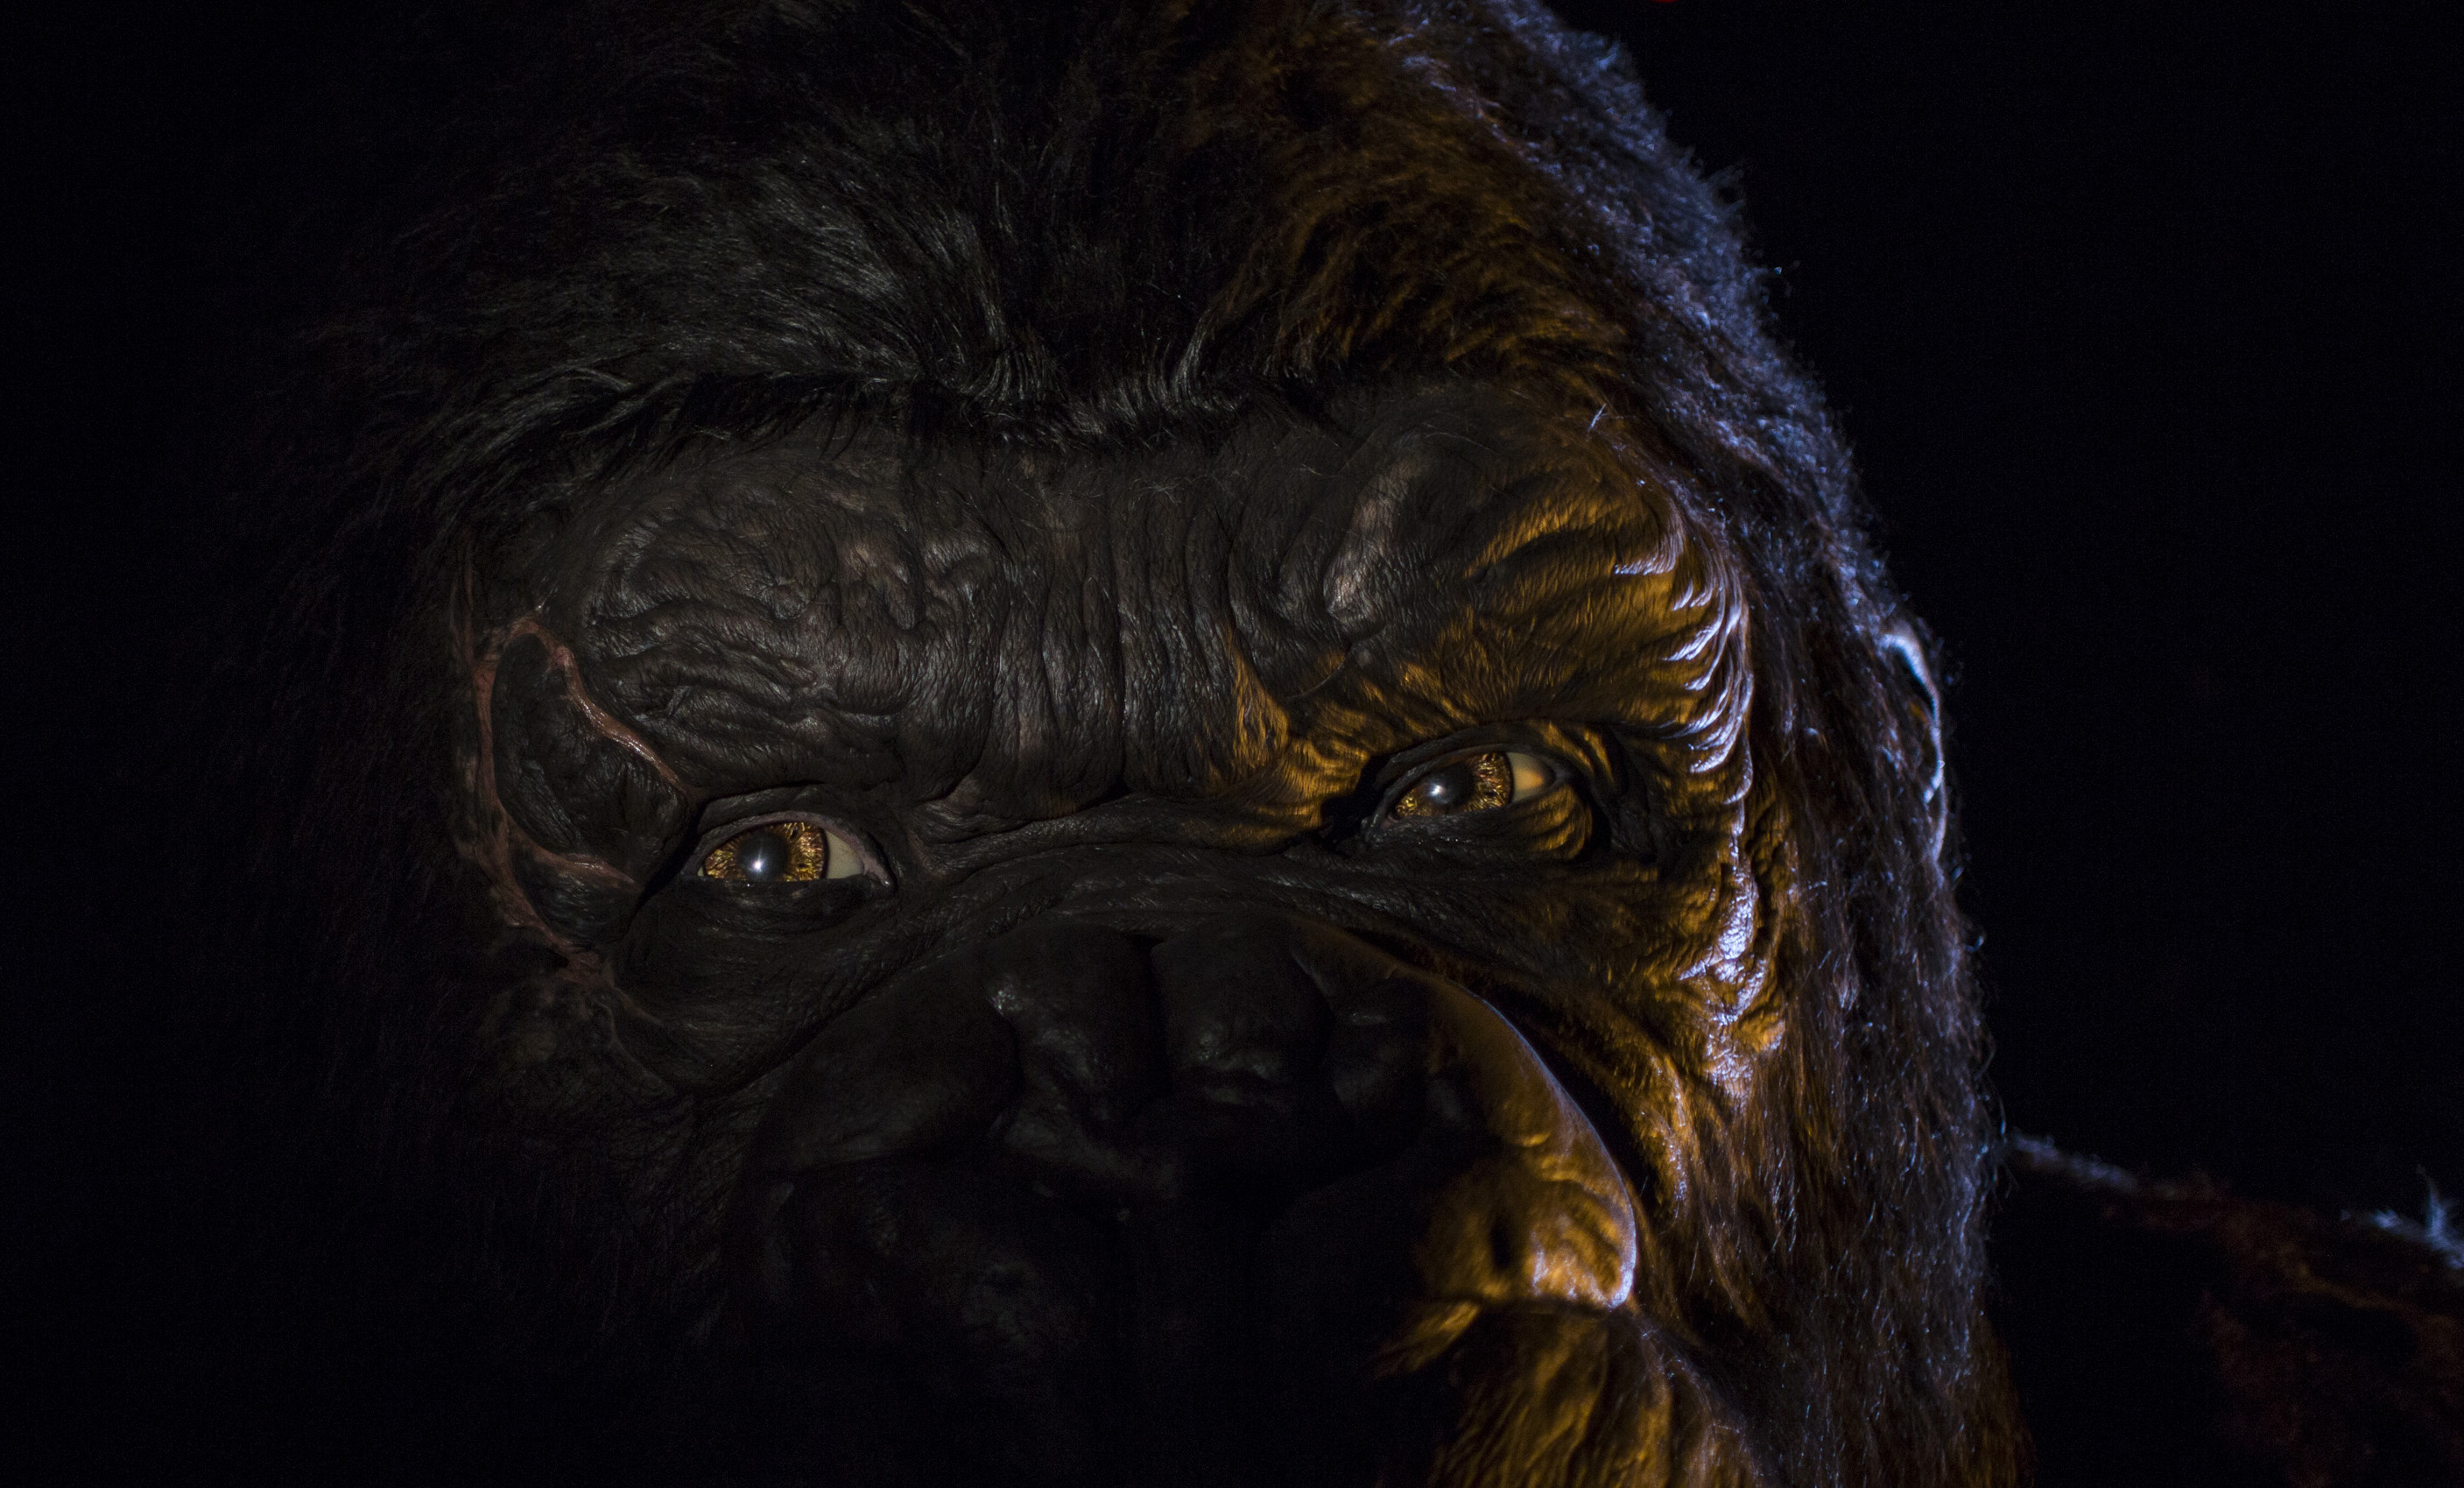 Universal Orlando Releases First Images Of King Kong